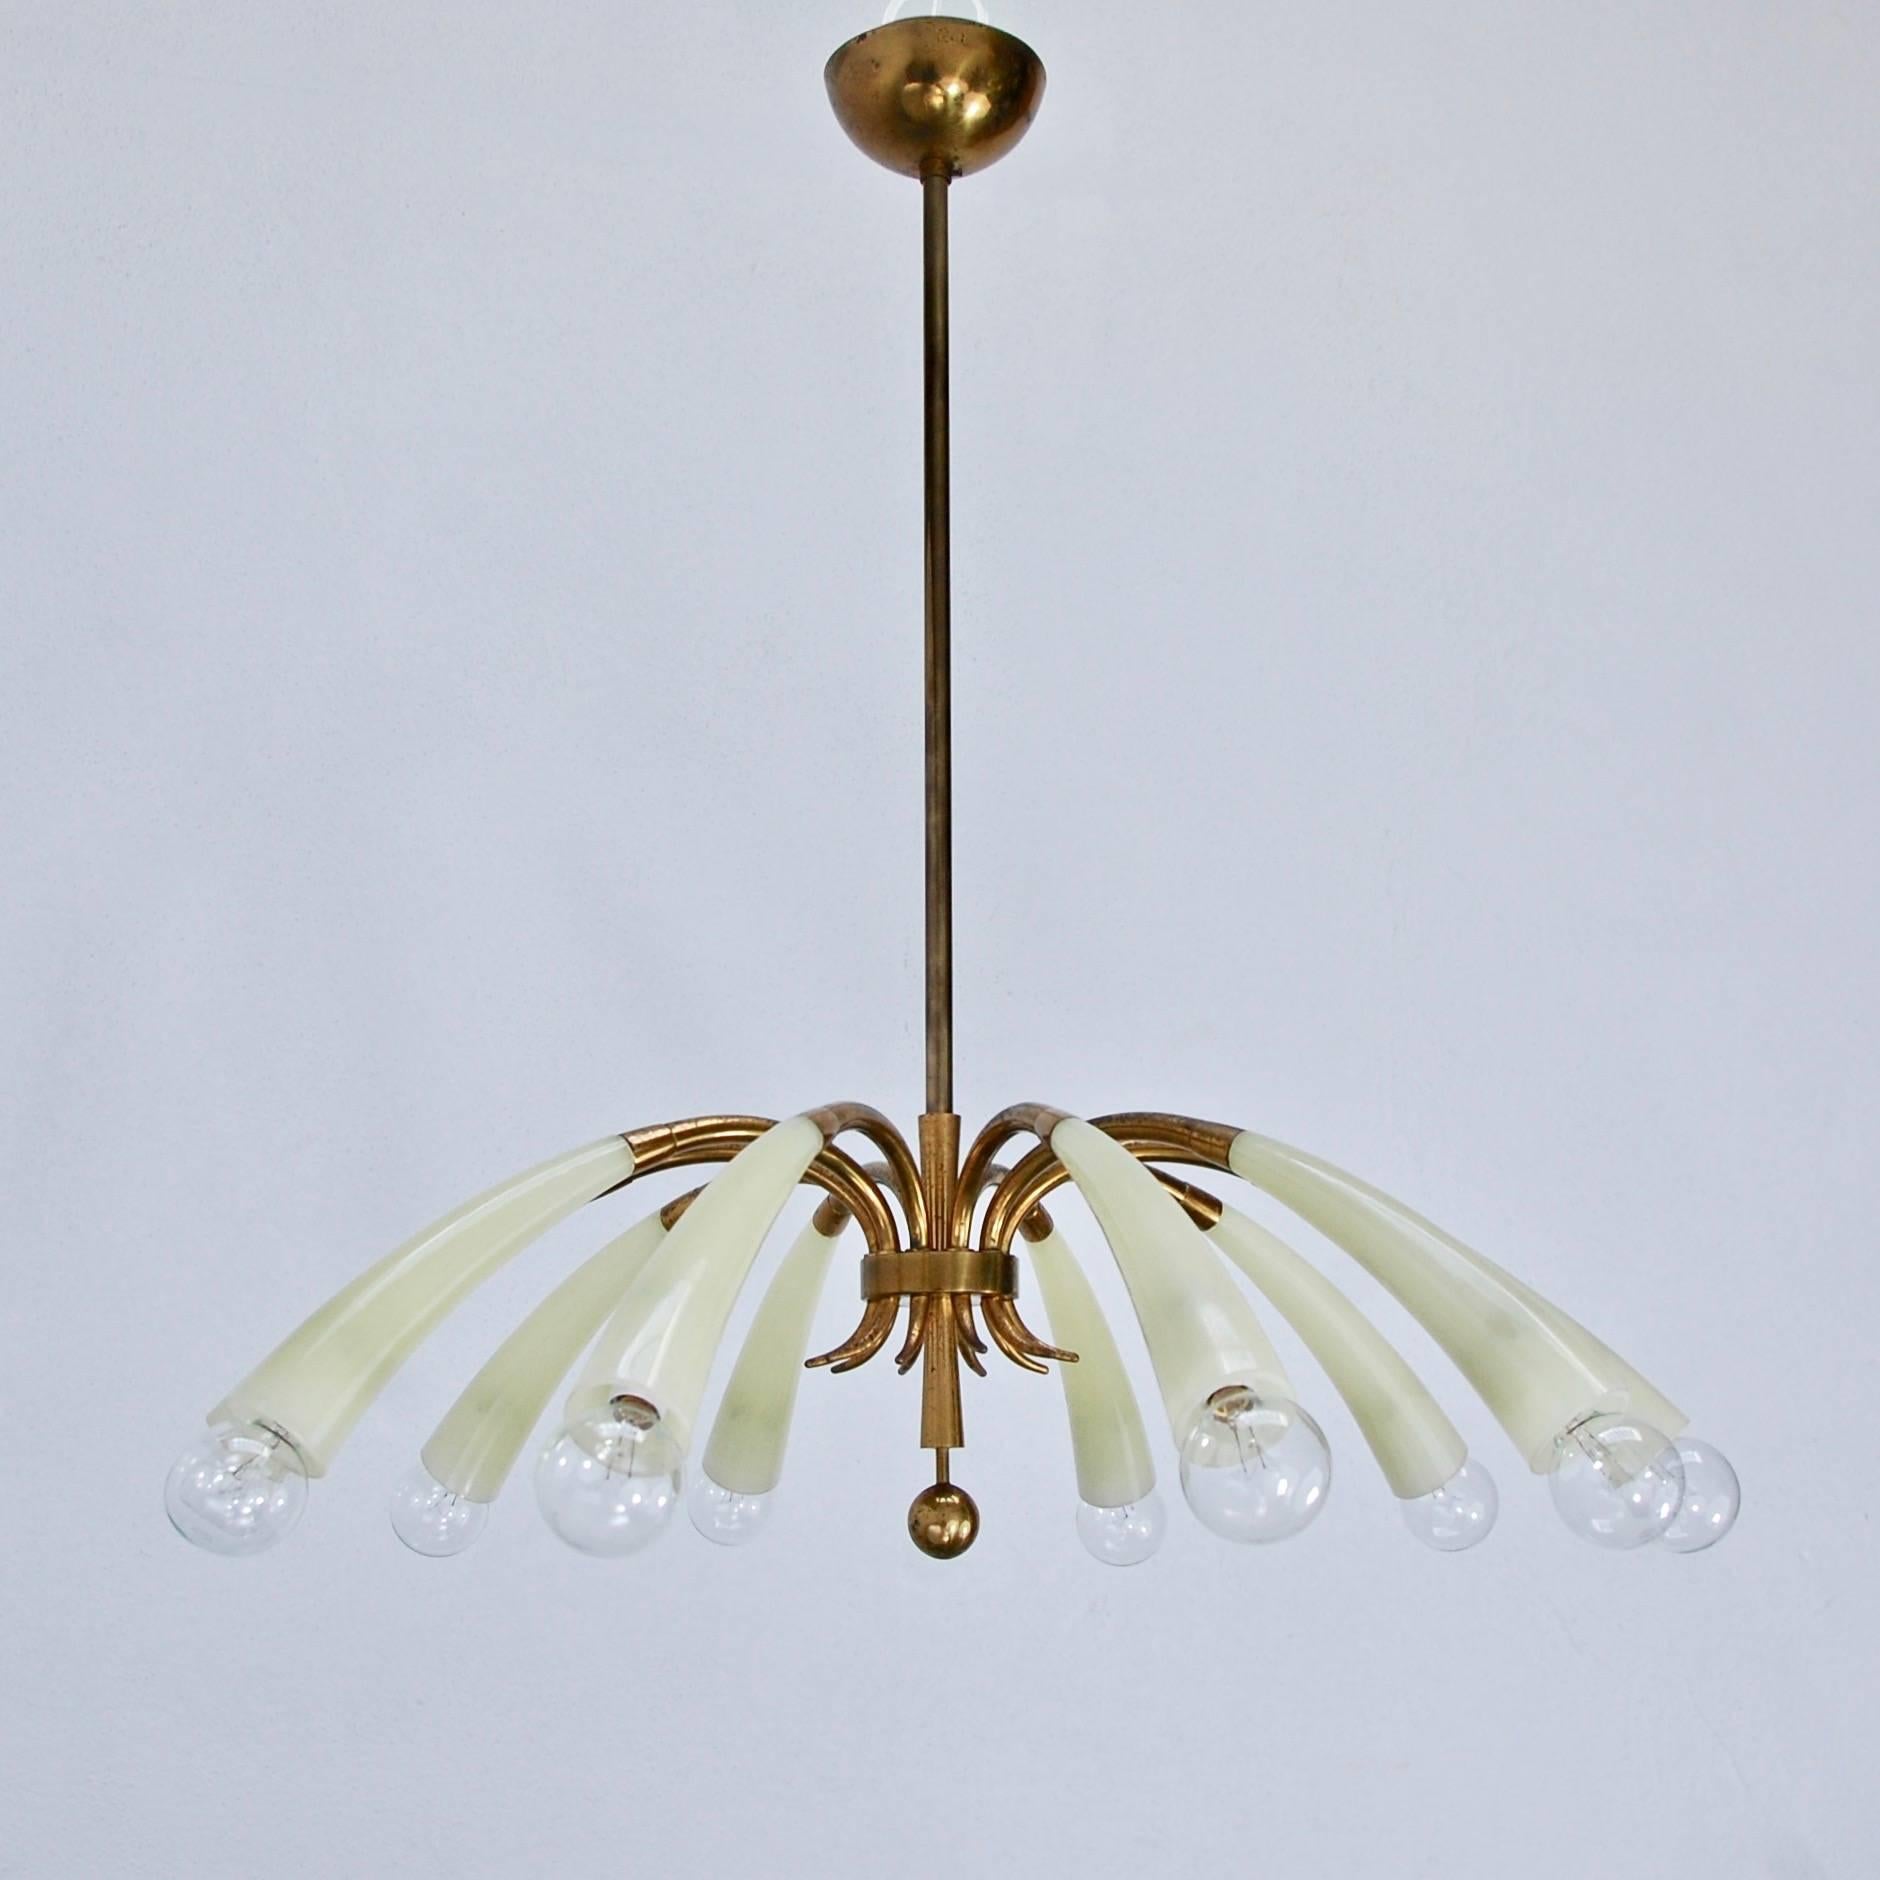 Stunning ten-light fluted glass chandelier from 1960s, Italy. Beautifully naturally aged brass and elegant fluted arms. 
OAD: 28.5” with light bulbs
Diameter: 27”
Chandelier Height: 9”.
  